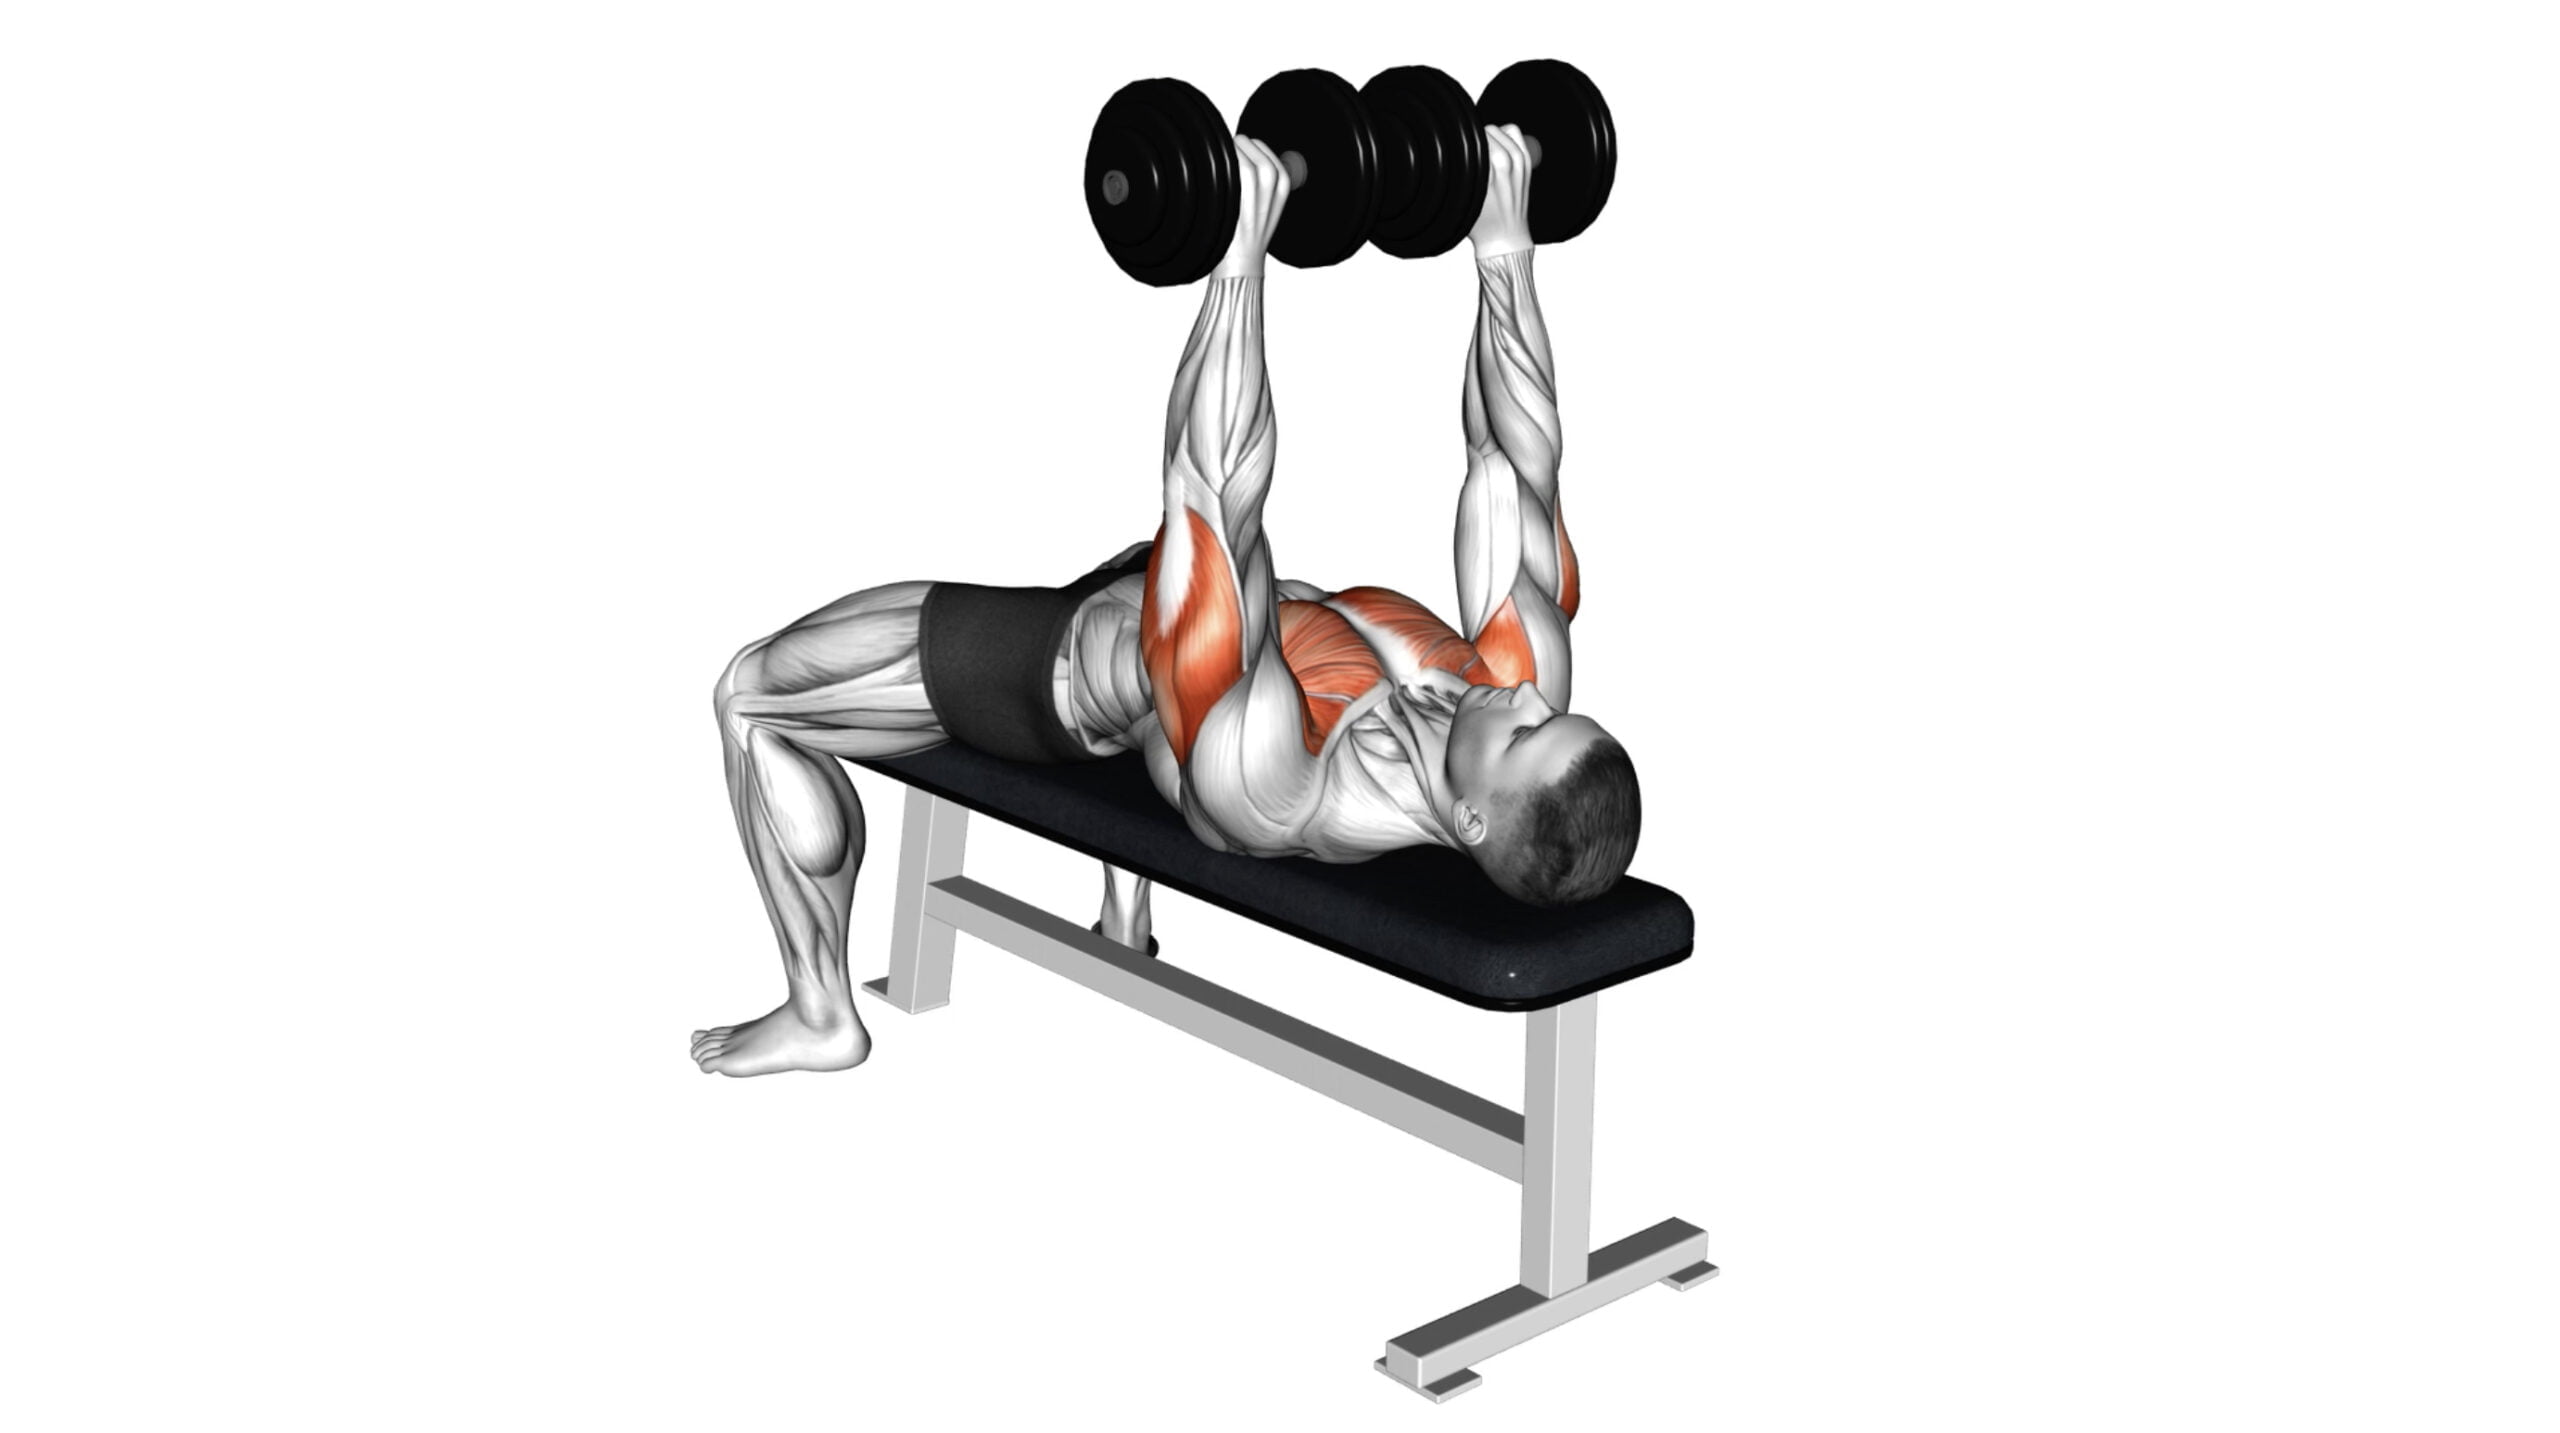 10 Gym Bench Exercises To Sculpt And Strengthen Your Body